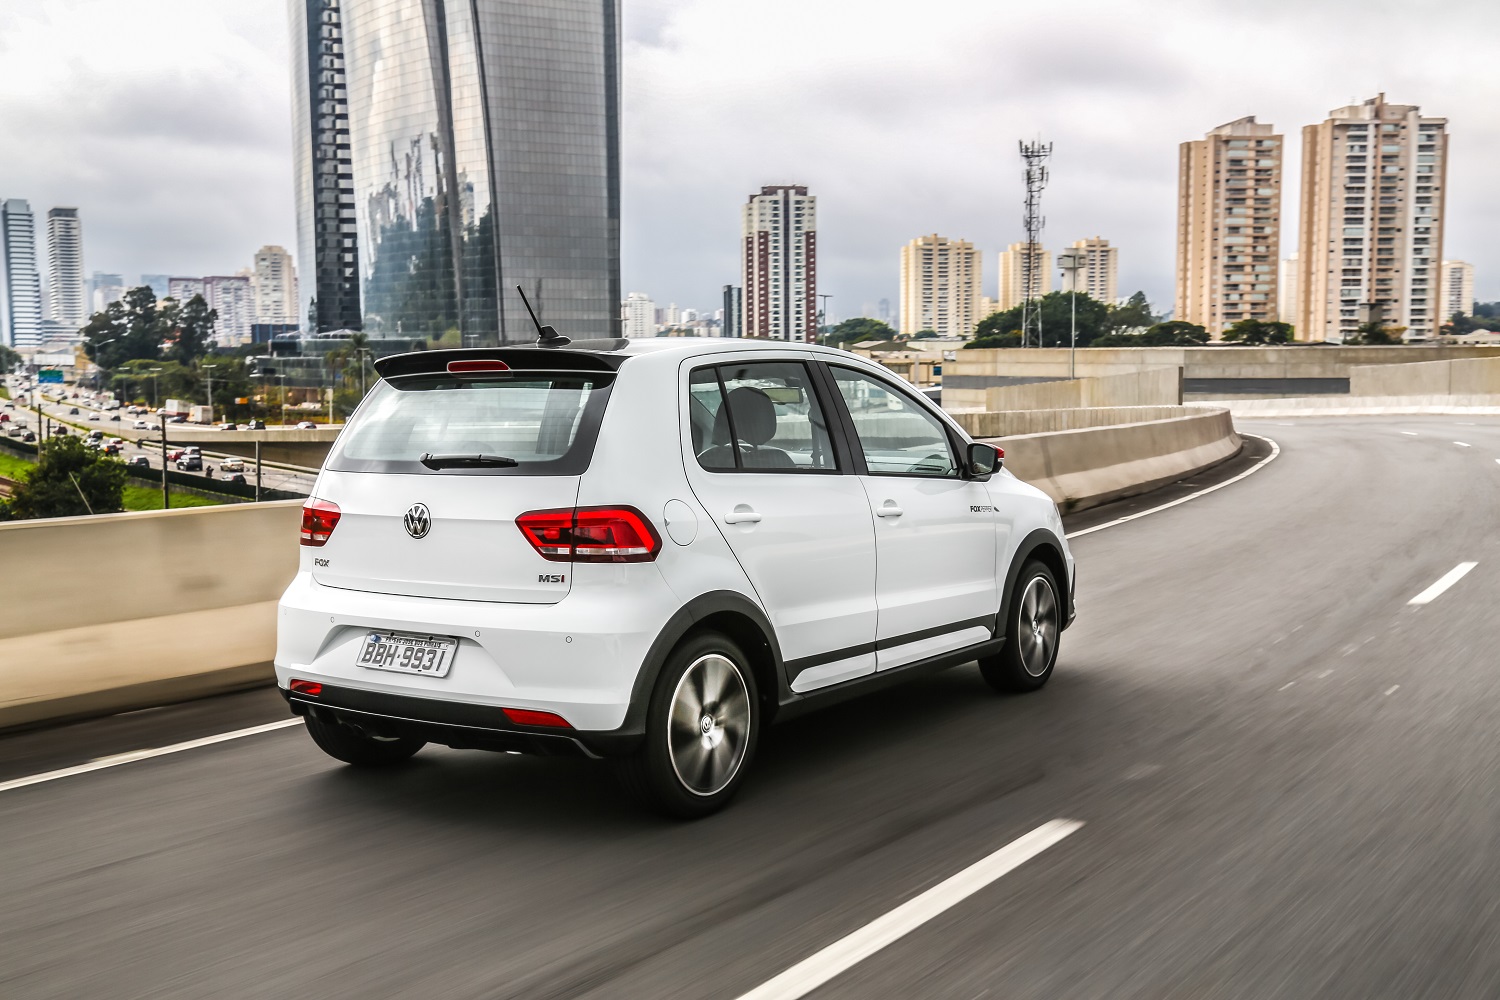 VW Fox Pepper with 1.6L engine arrives in Brazil